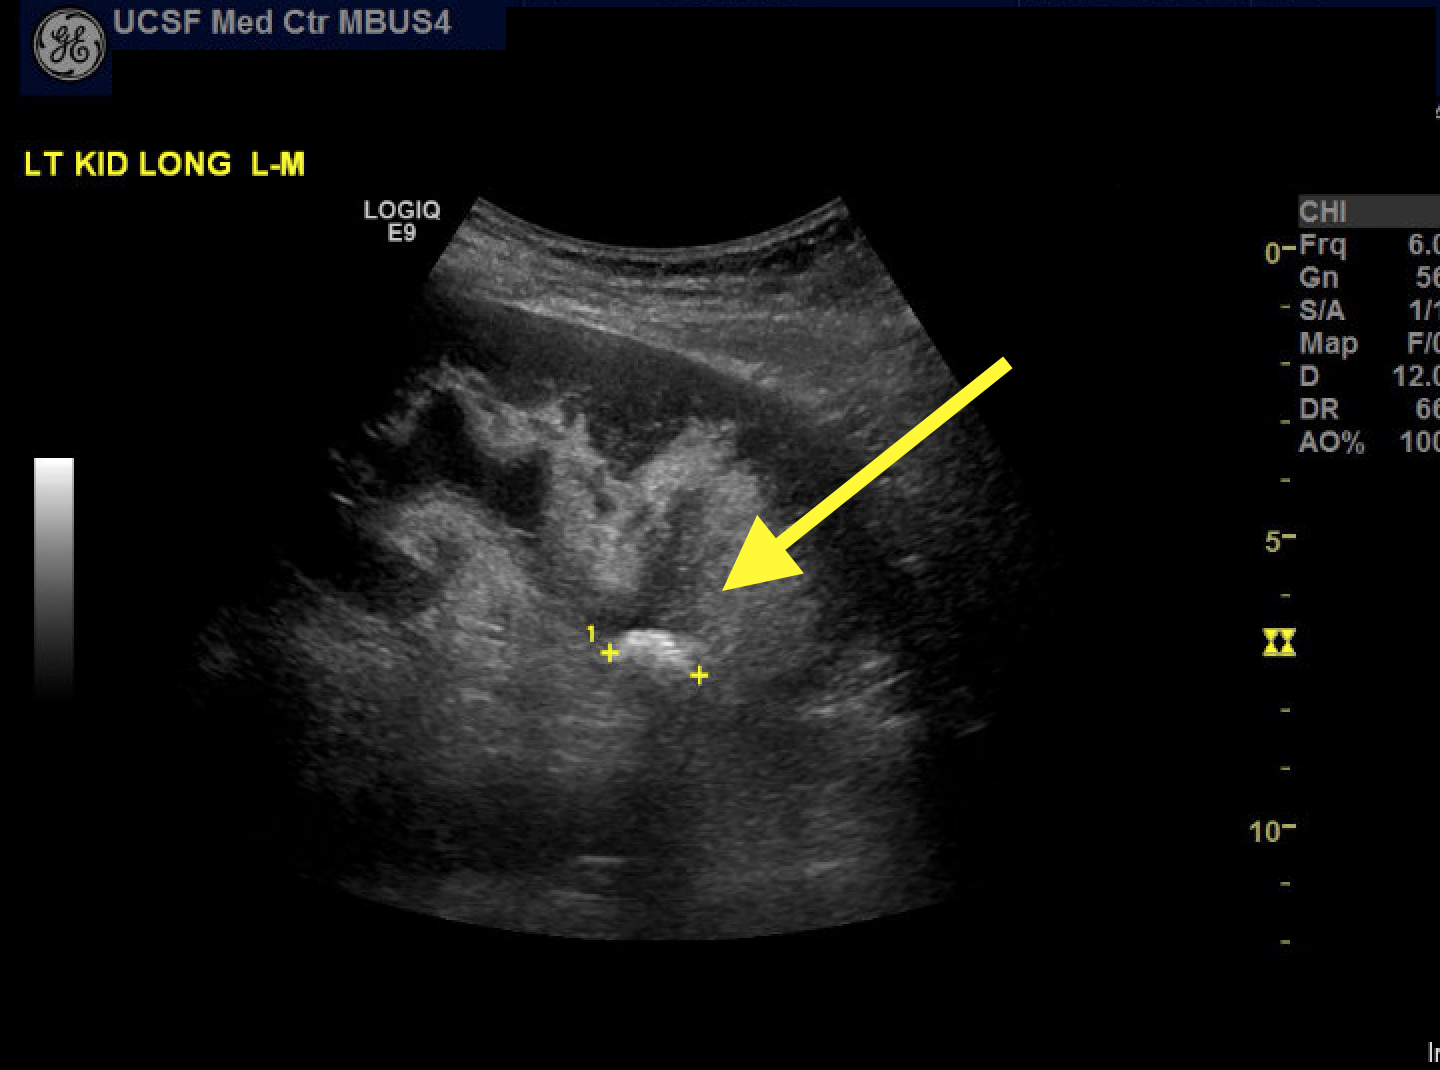 ultrasound-guided-pcnl-innovation-comes-with-patient-safety-and